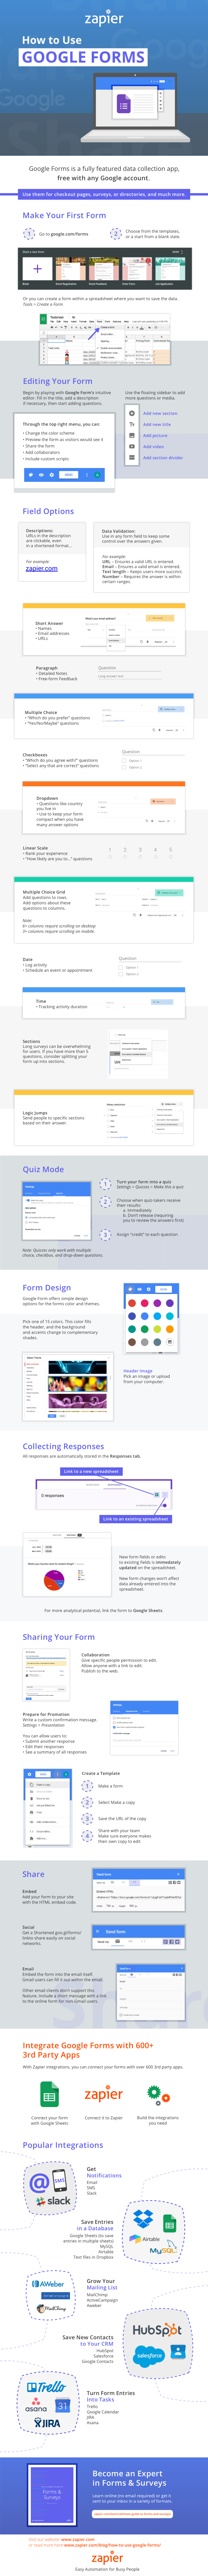 Learn How To Master Google Forms With This Handy Visual Guide